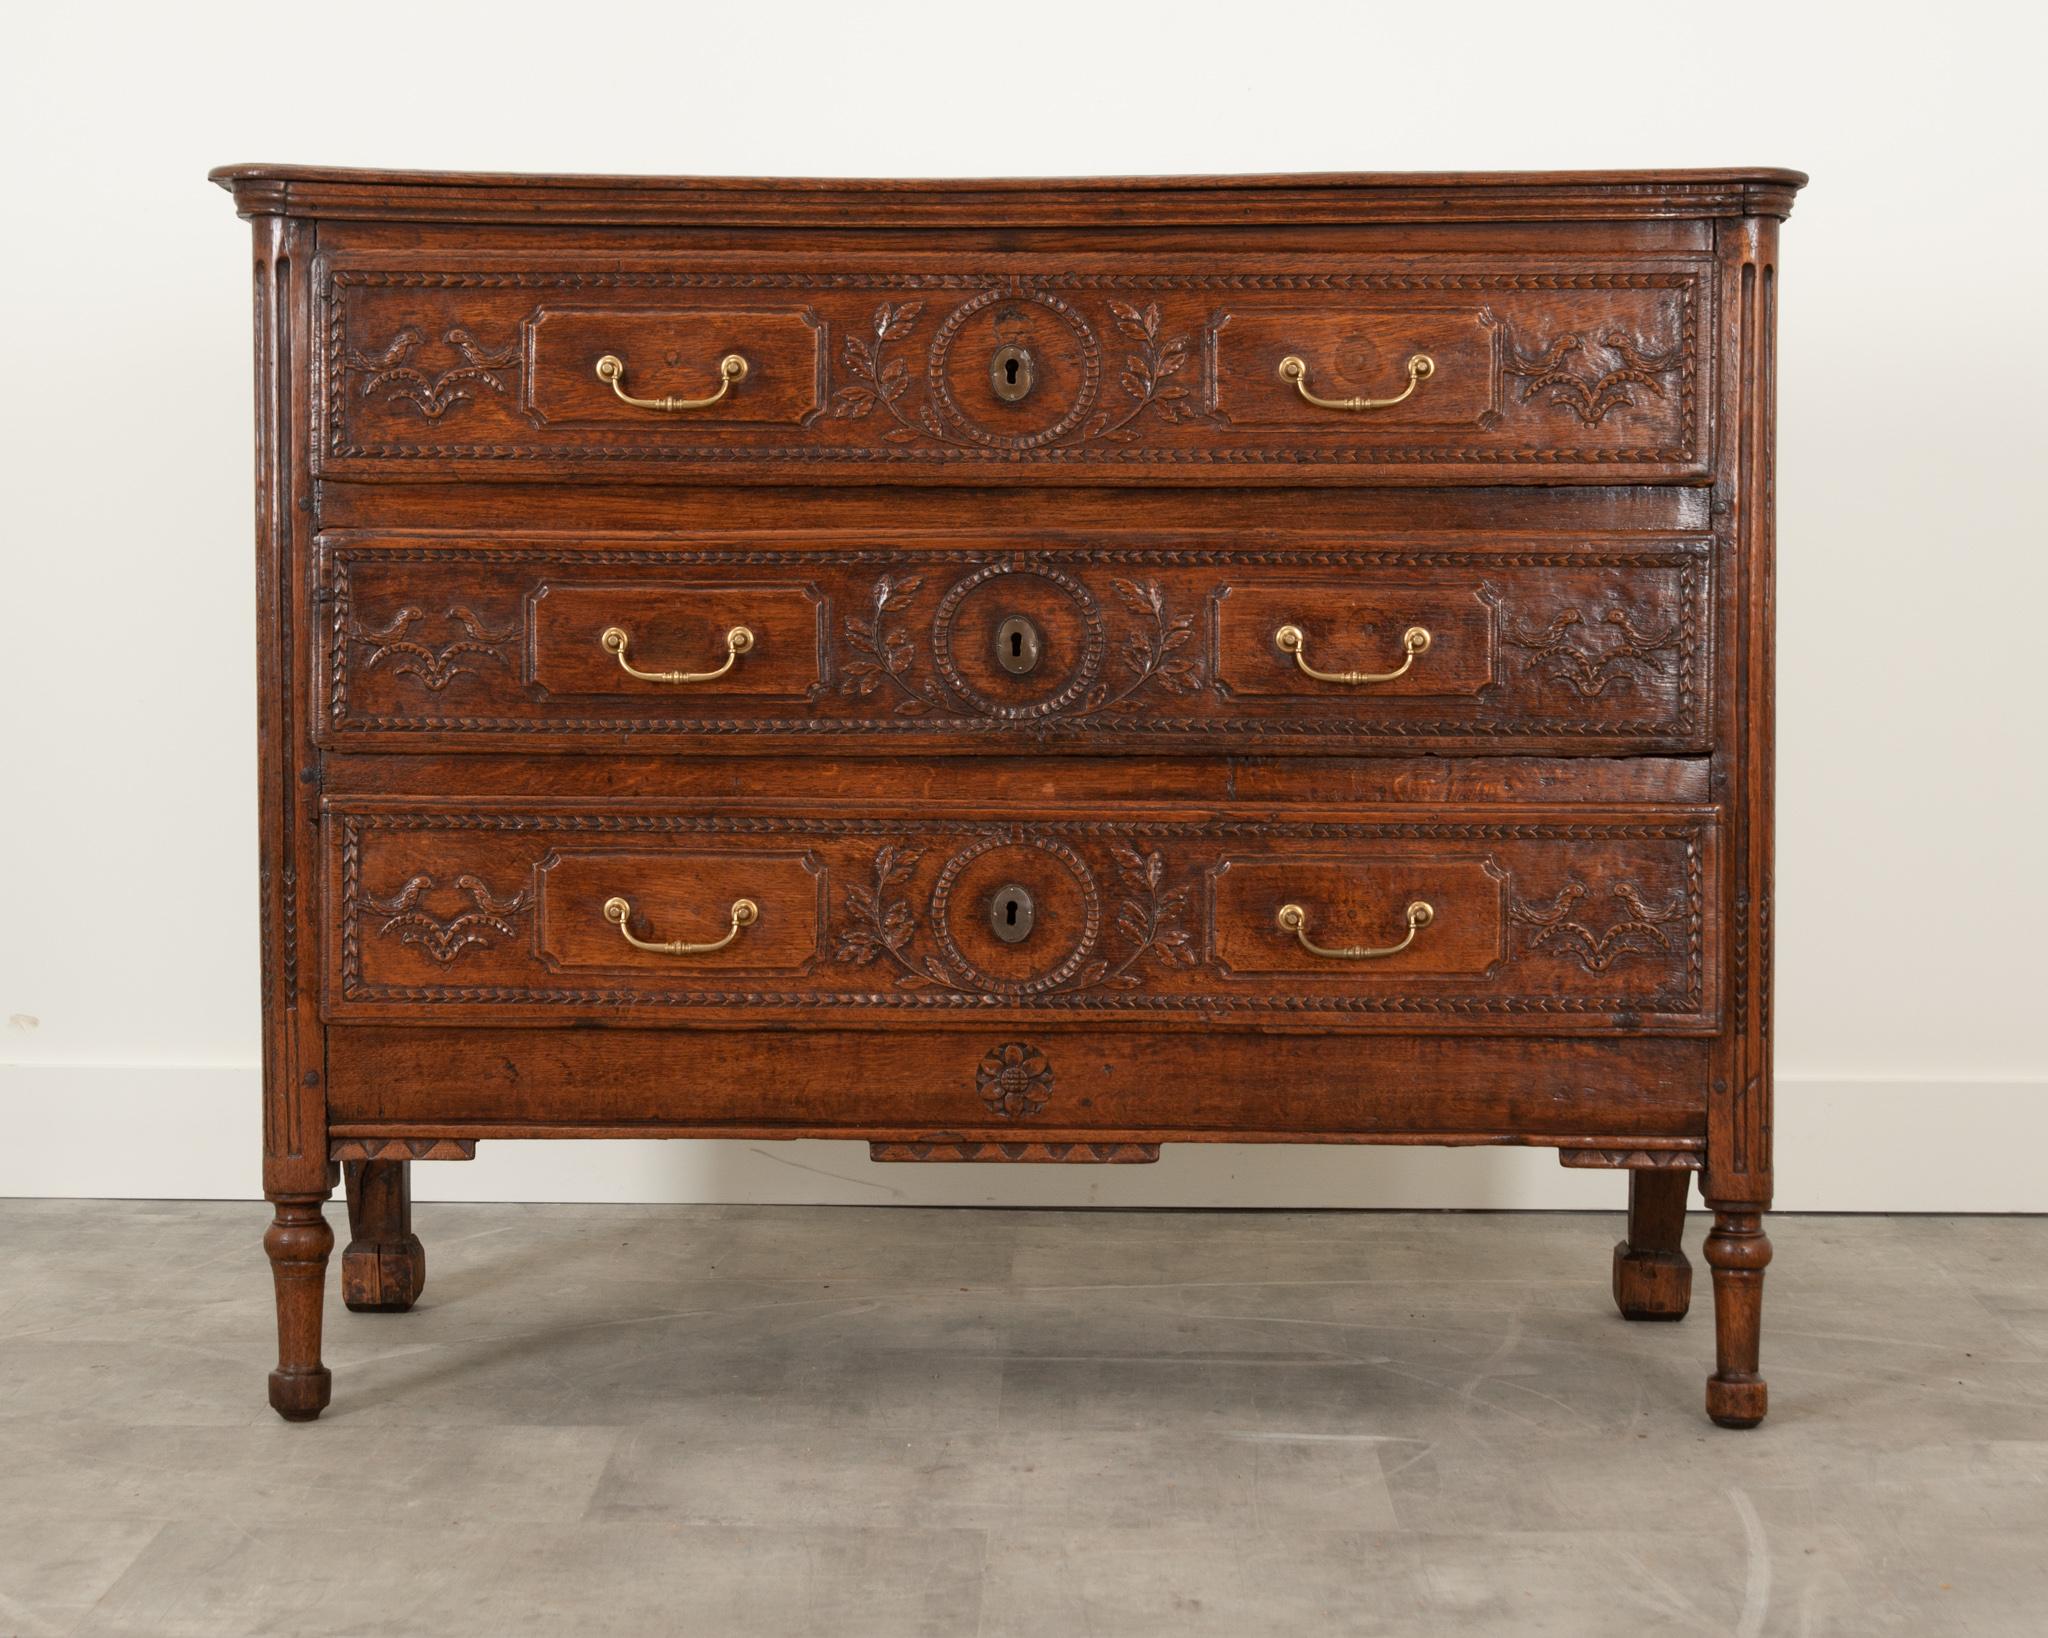 A handsome and impressive French commode from the 1780’s. Made of solid oak, this case piece is simply designed from the Louis XVI style. The drawers have intricately hand carved designs of birds and flowers with more recent drawer pulls. All joints